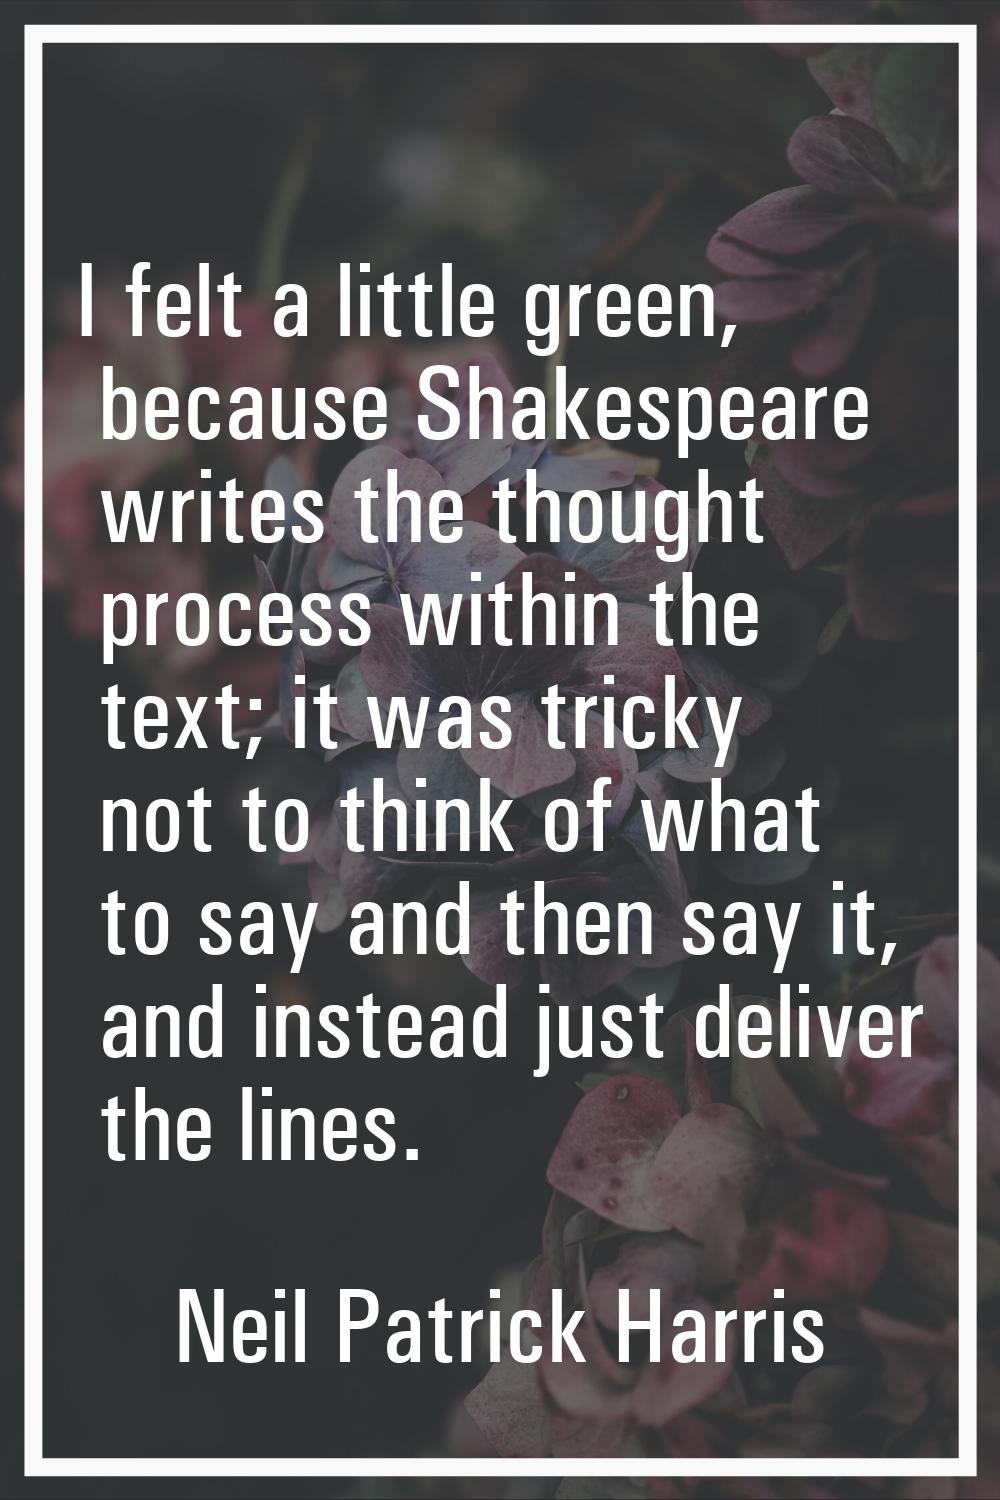 I felt a little green, because Shakespeare writes the thought process within the text; it was trick